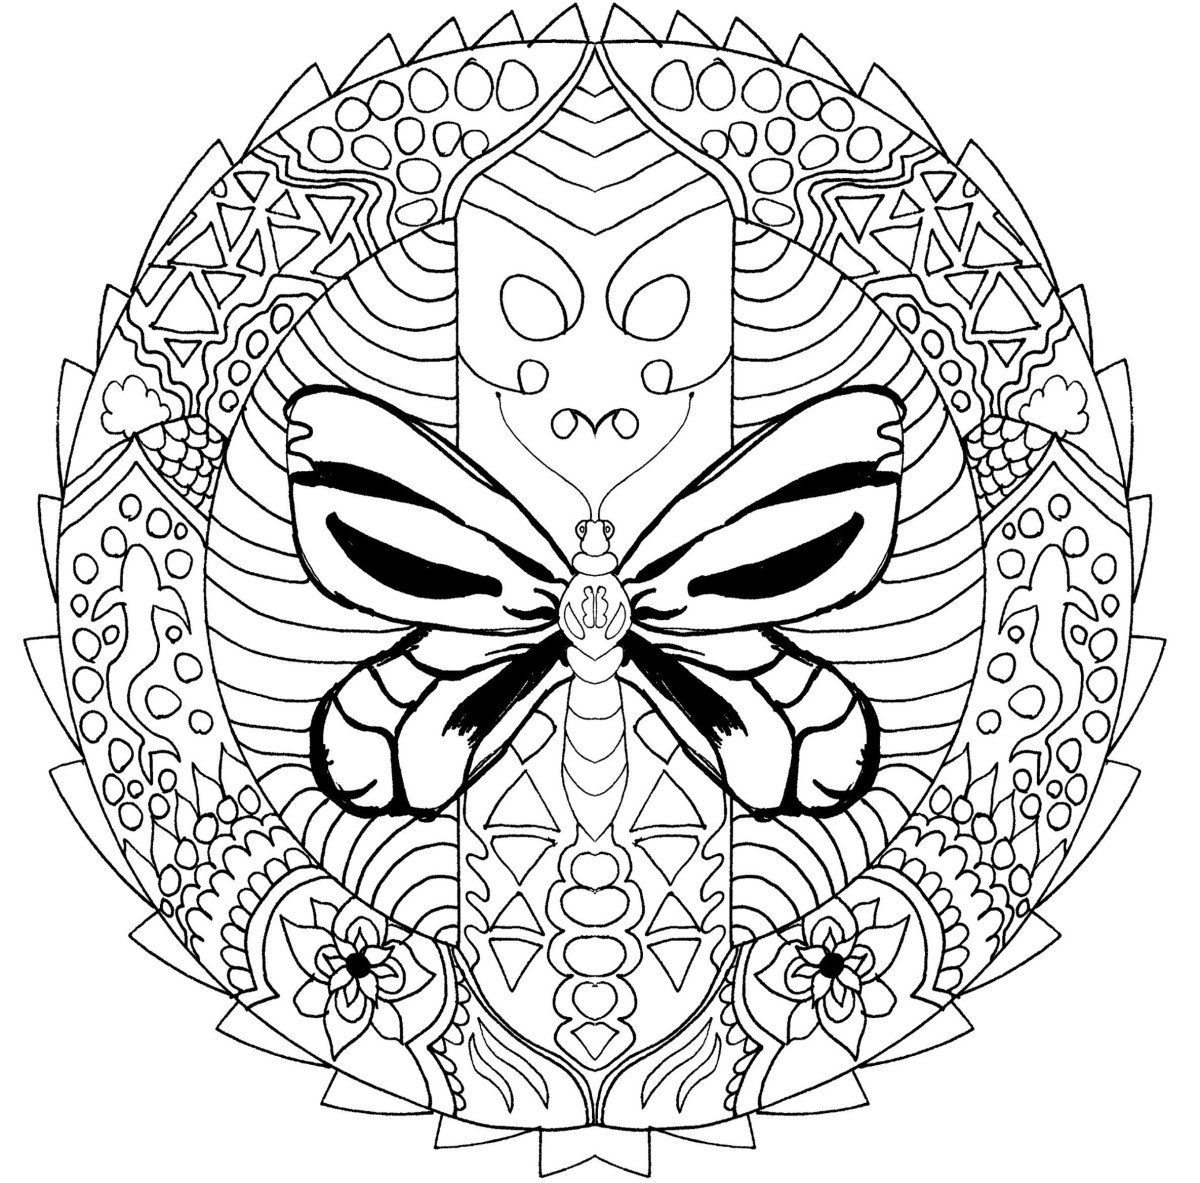 A Mandala Menagerie: 10 Free Printable Adult Coloring Pages Featuring  Animal Mandalas - FeltMagnet - Crafts